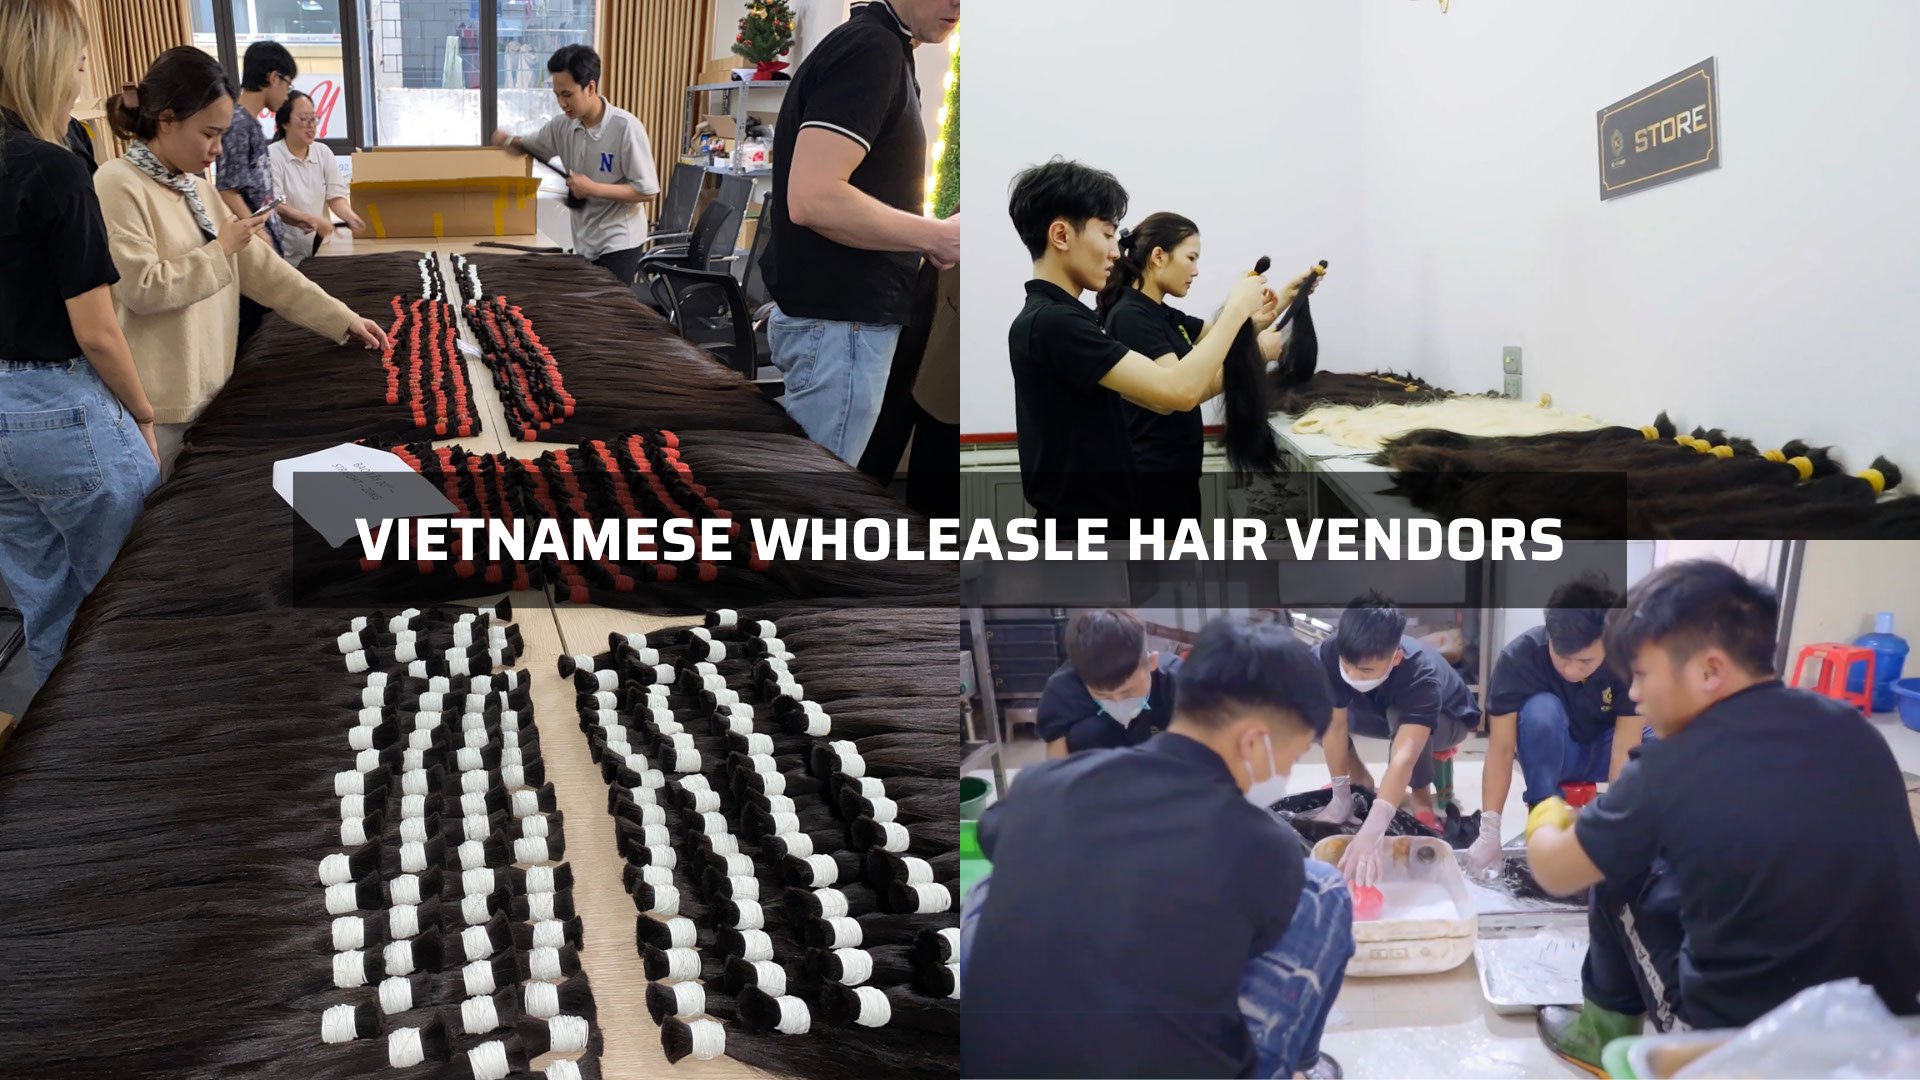 Vietnamese Wholesale Hair Vendors are well known as the best hair suppliers in the world